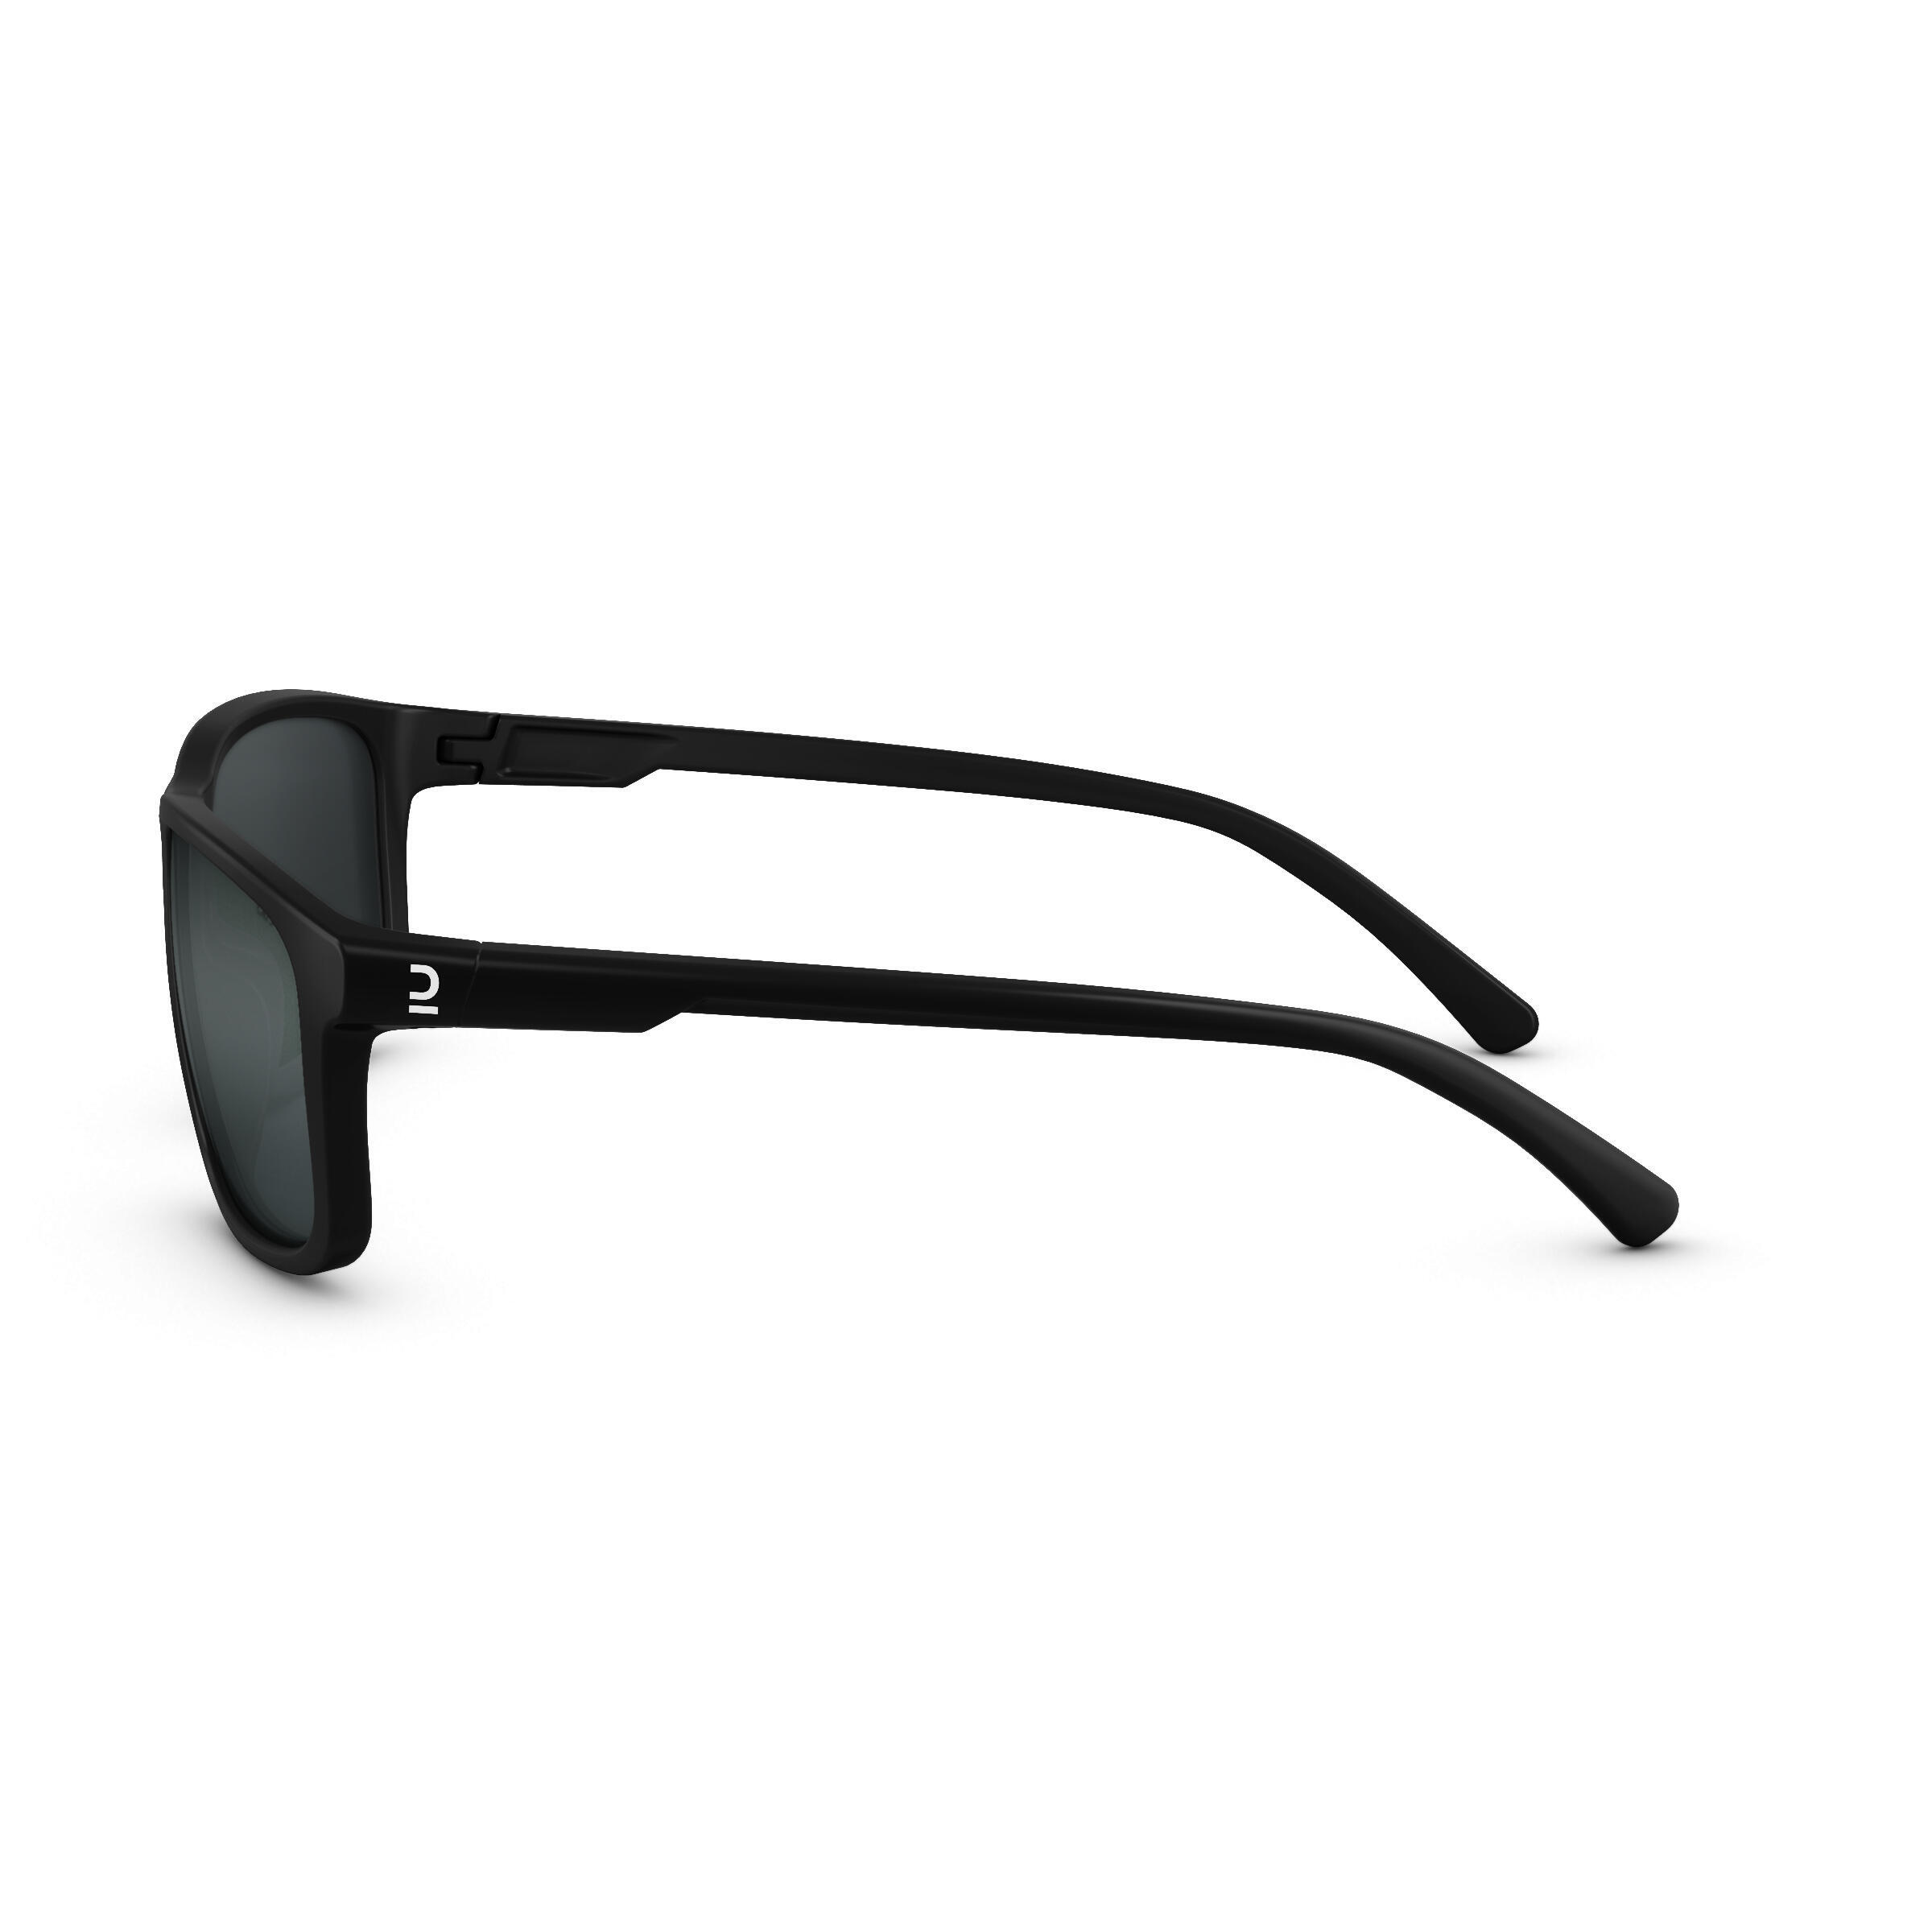 ADULT HIKING SUNGLASSES  MH100  CATEGORY 3 6/9